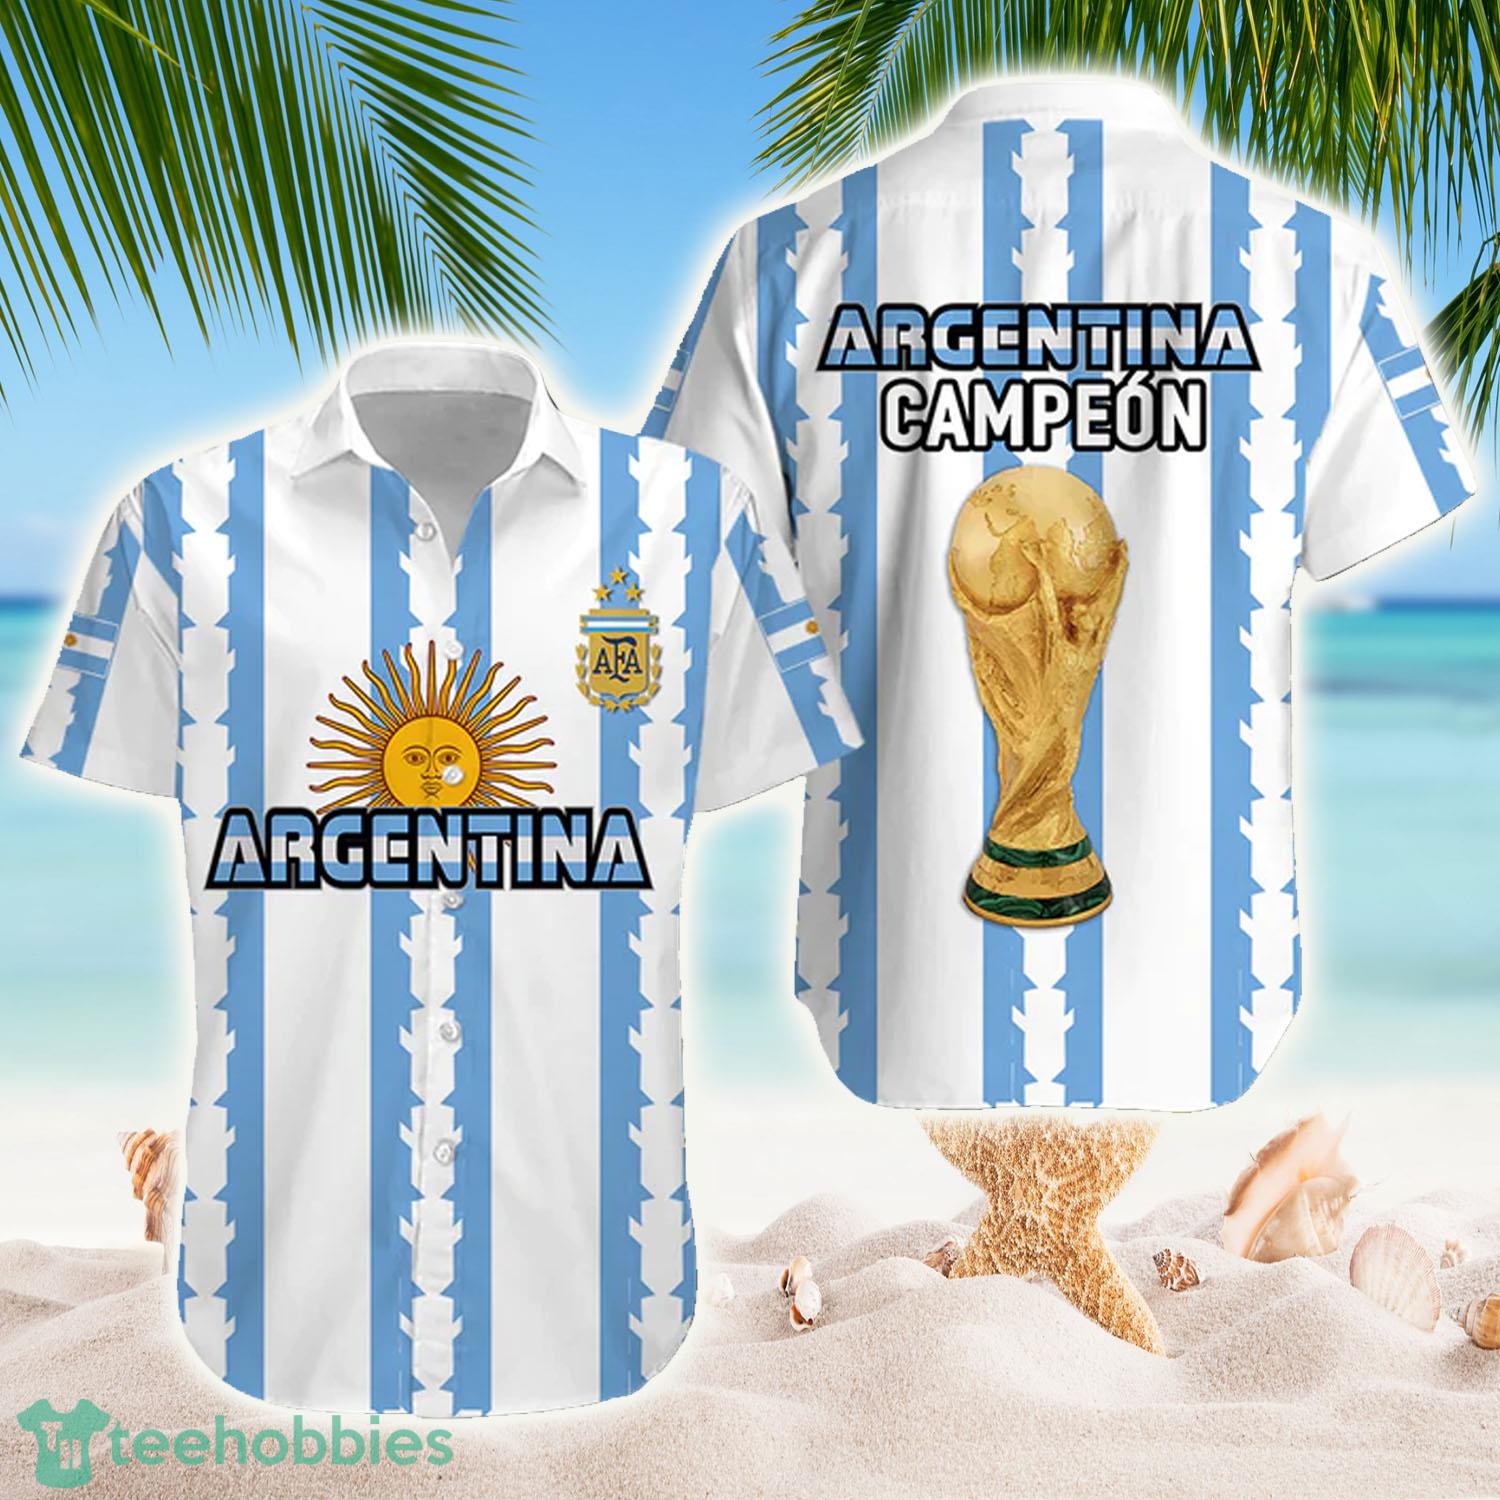 Argentina Football Campeon World Cup 2022 Pride Hawaiian Shirt - Argentina Football Campeon World Cup 2022 Pride Hawaiian Shirt